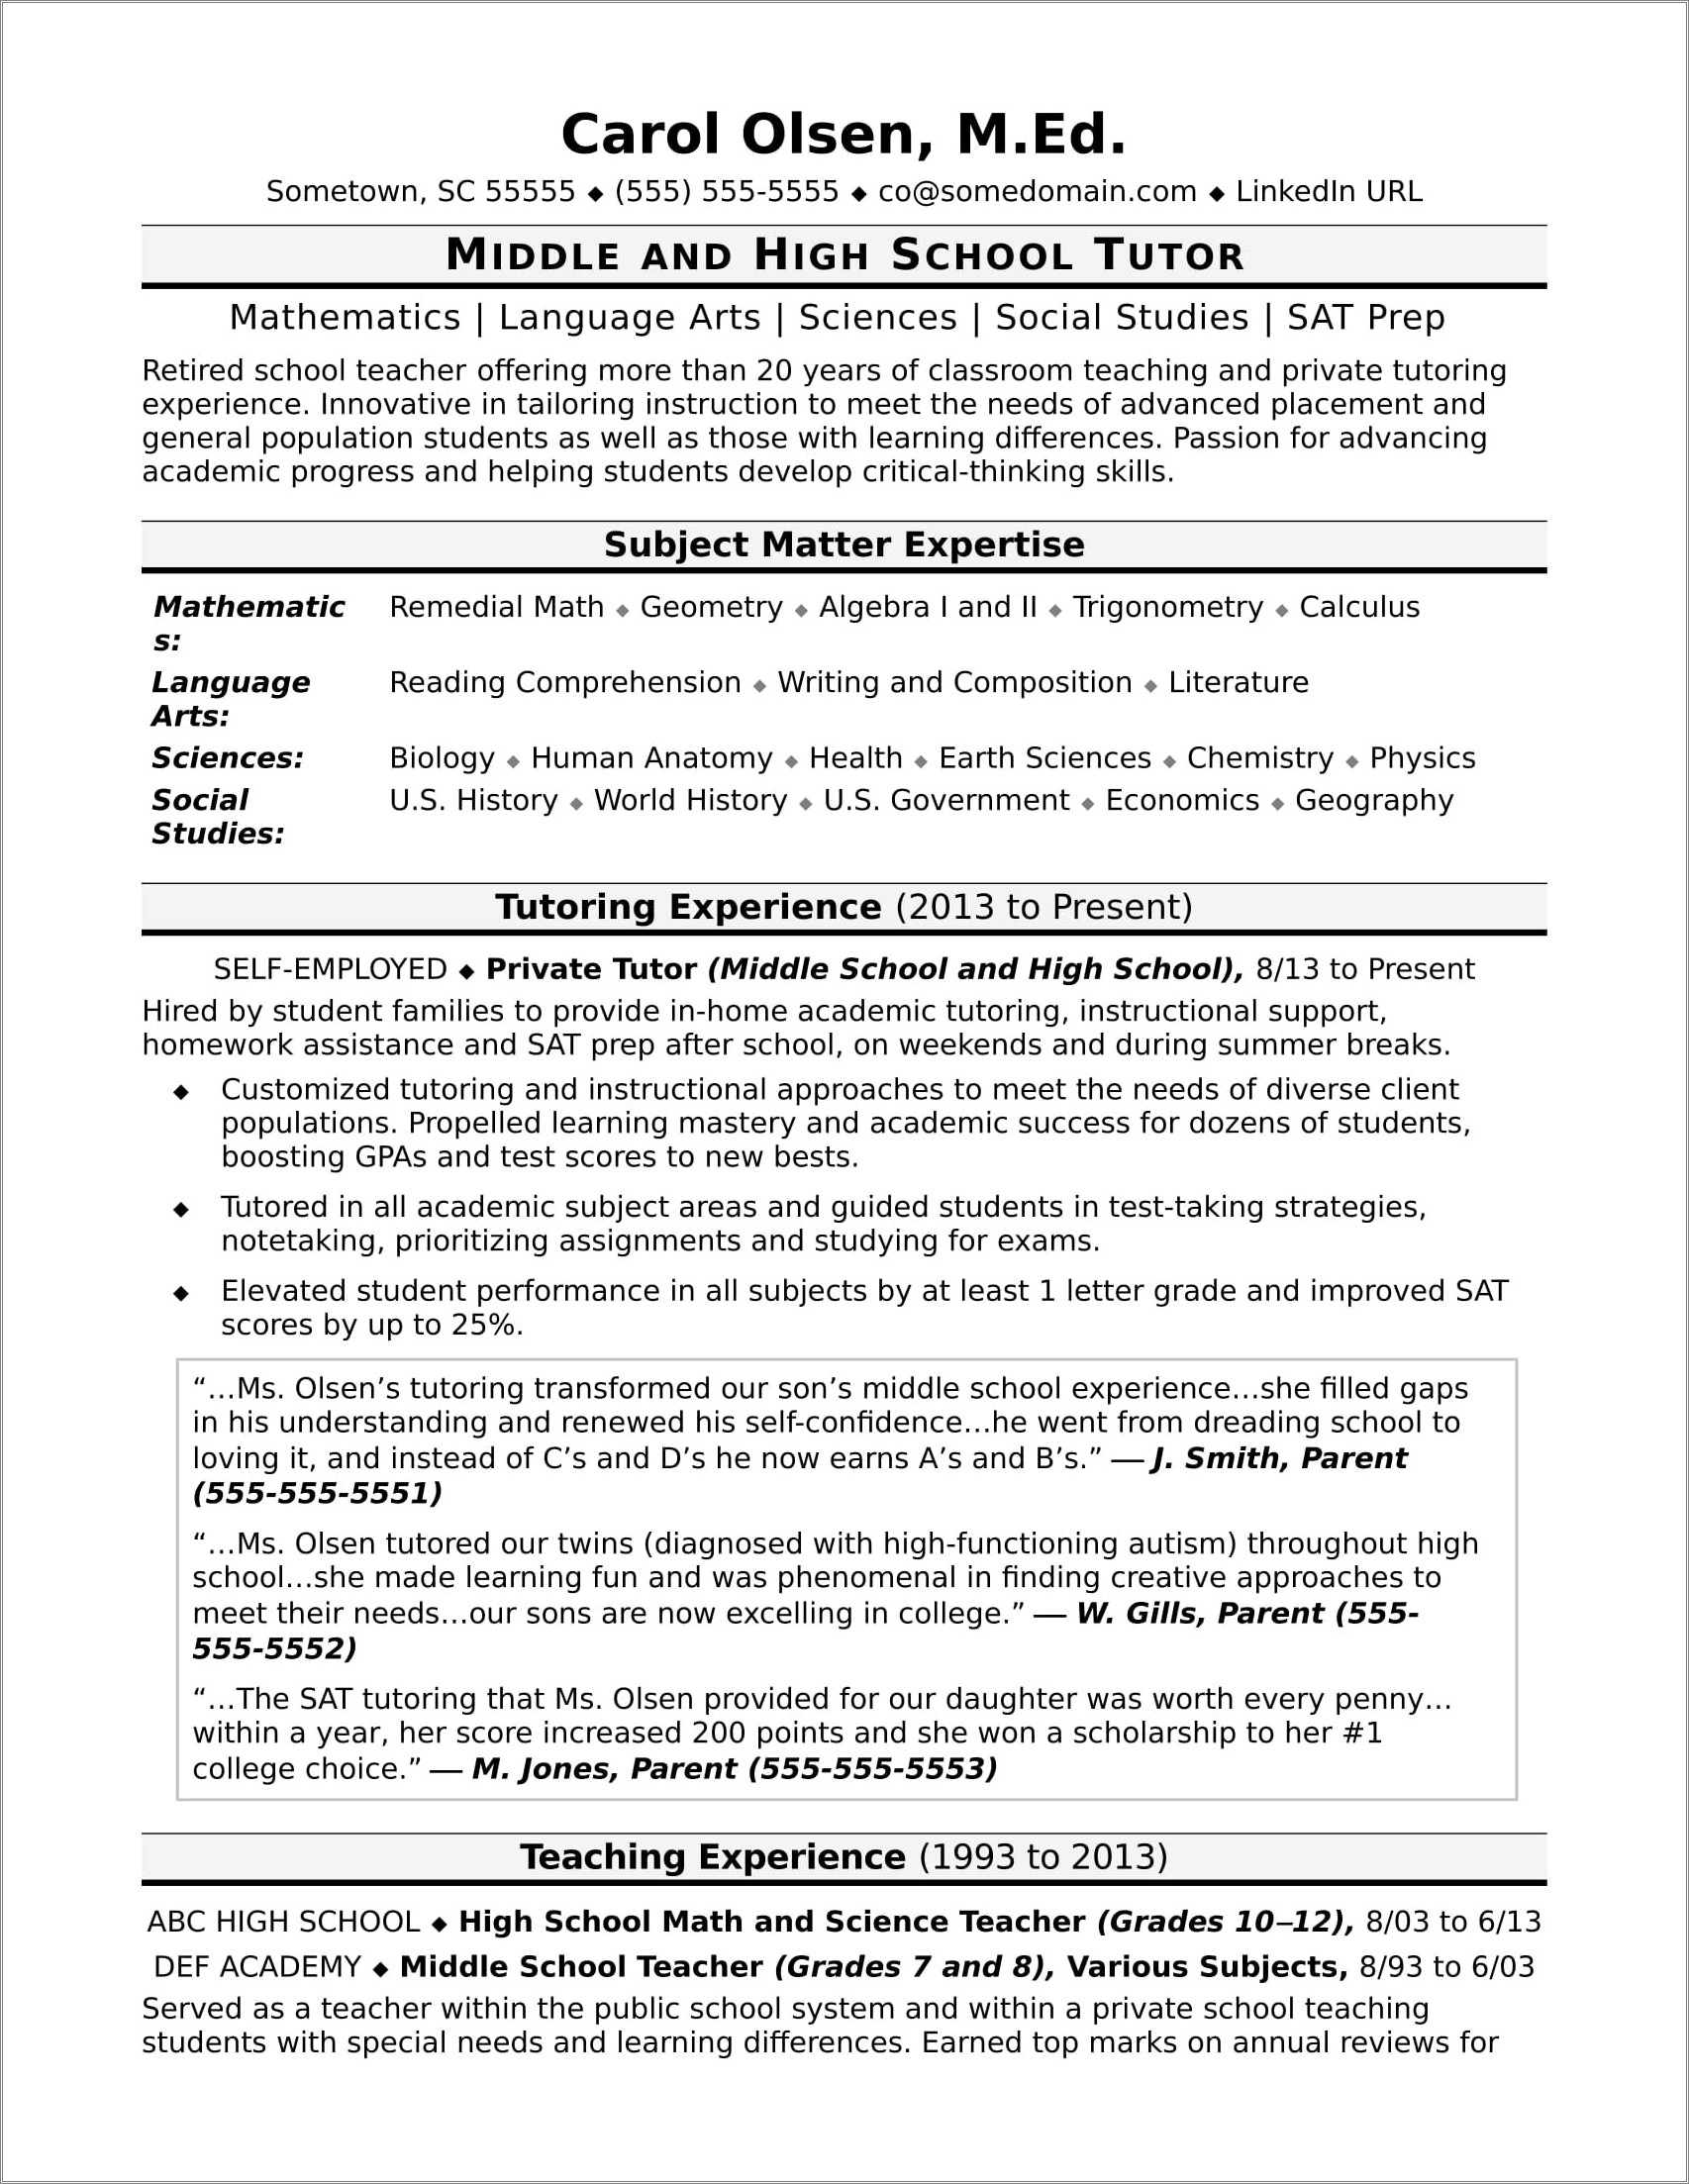 Resume Writing For High School Students Template